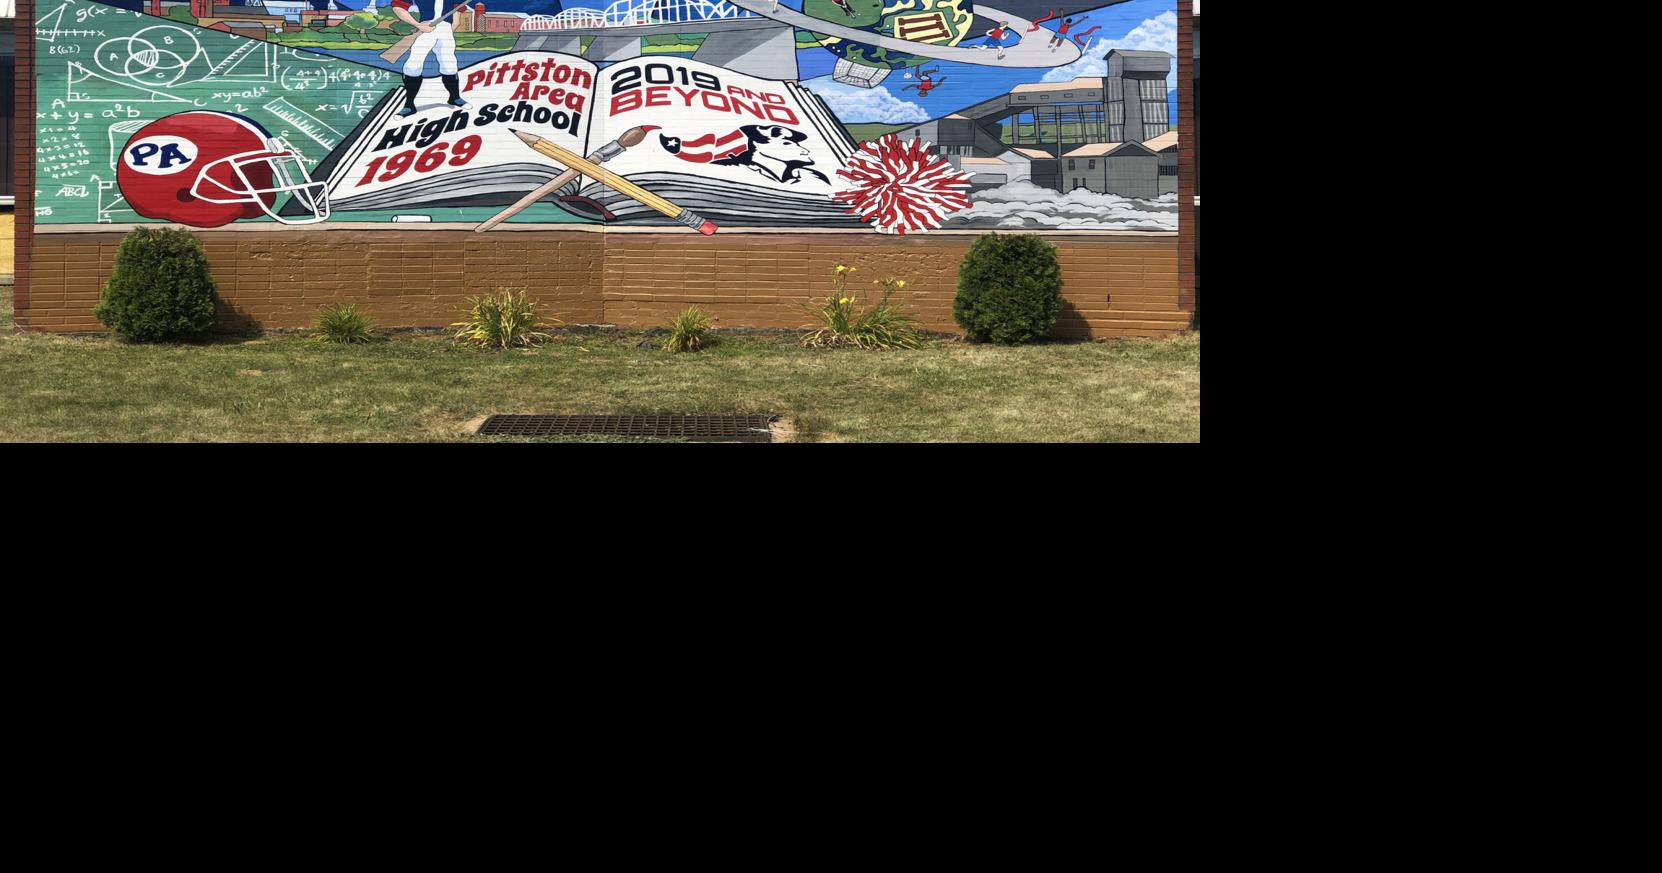 Pittston Area art mural project complete